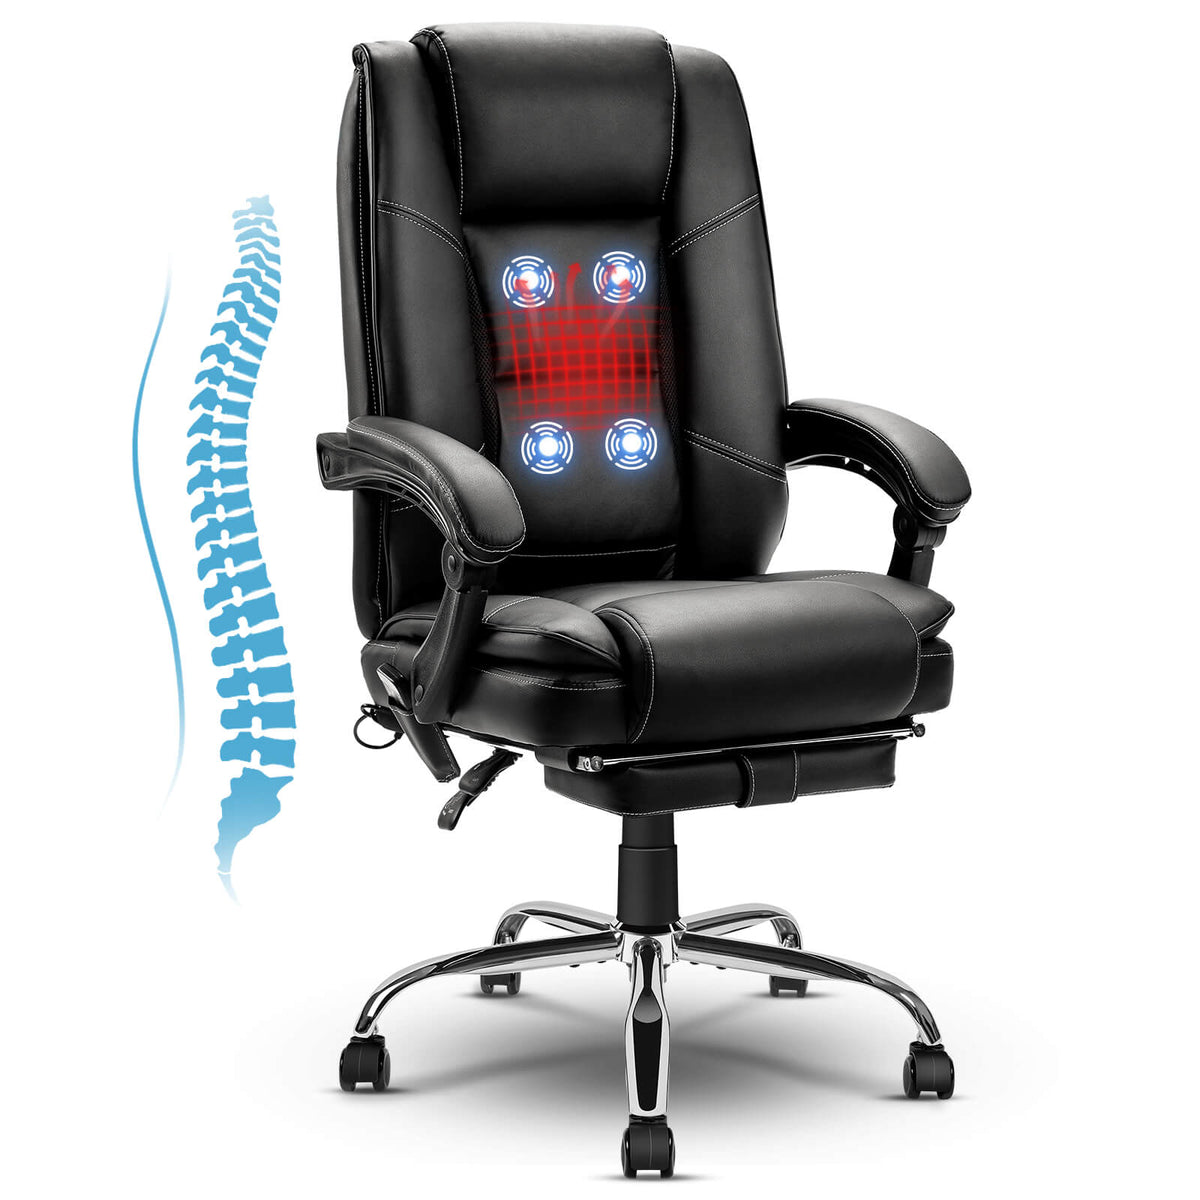 Big and Tall Ergonomic Office Chair with 4 Points Massage & Heating, Reclining Backrest, Footrest & Pillow, Black